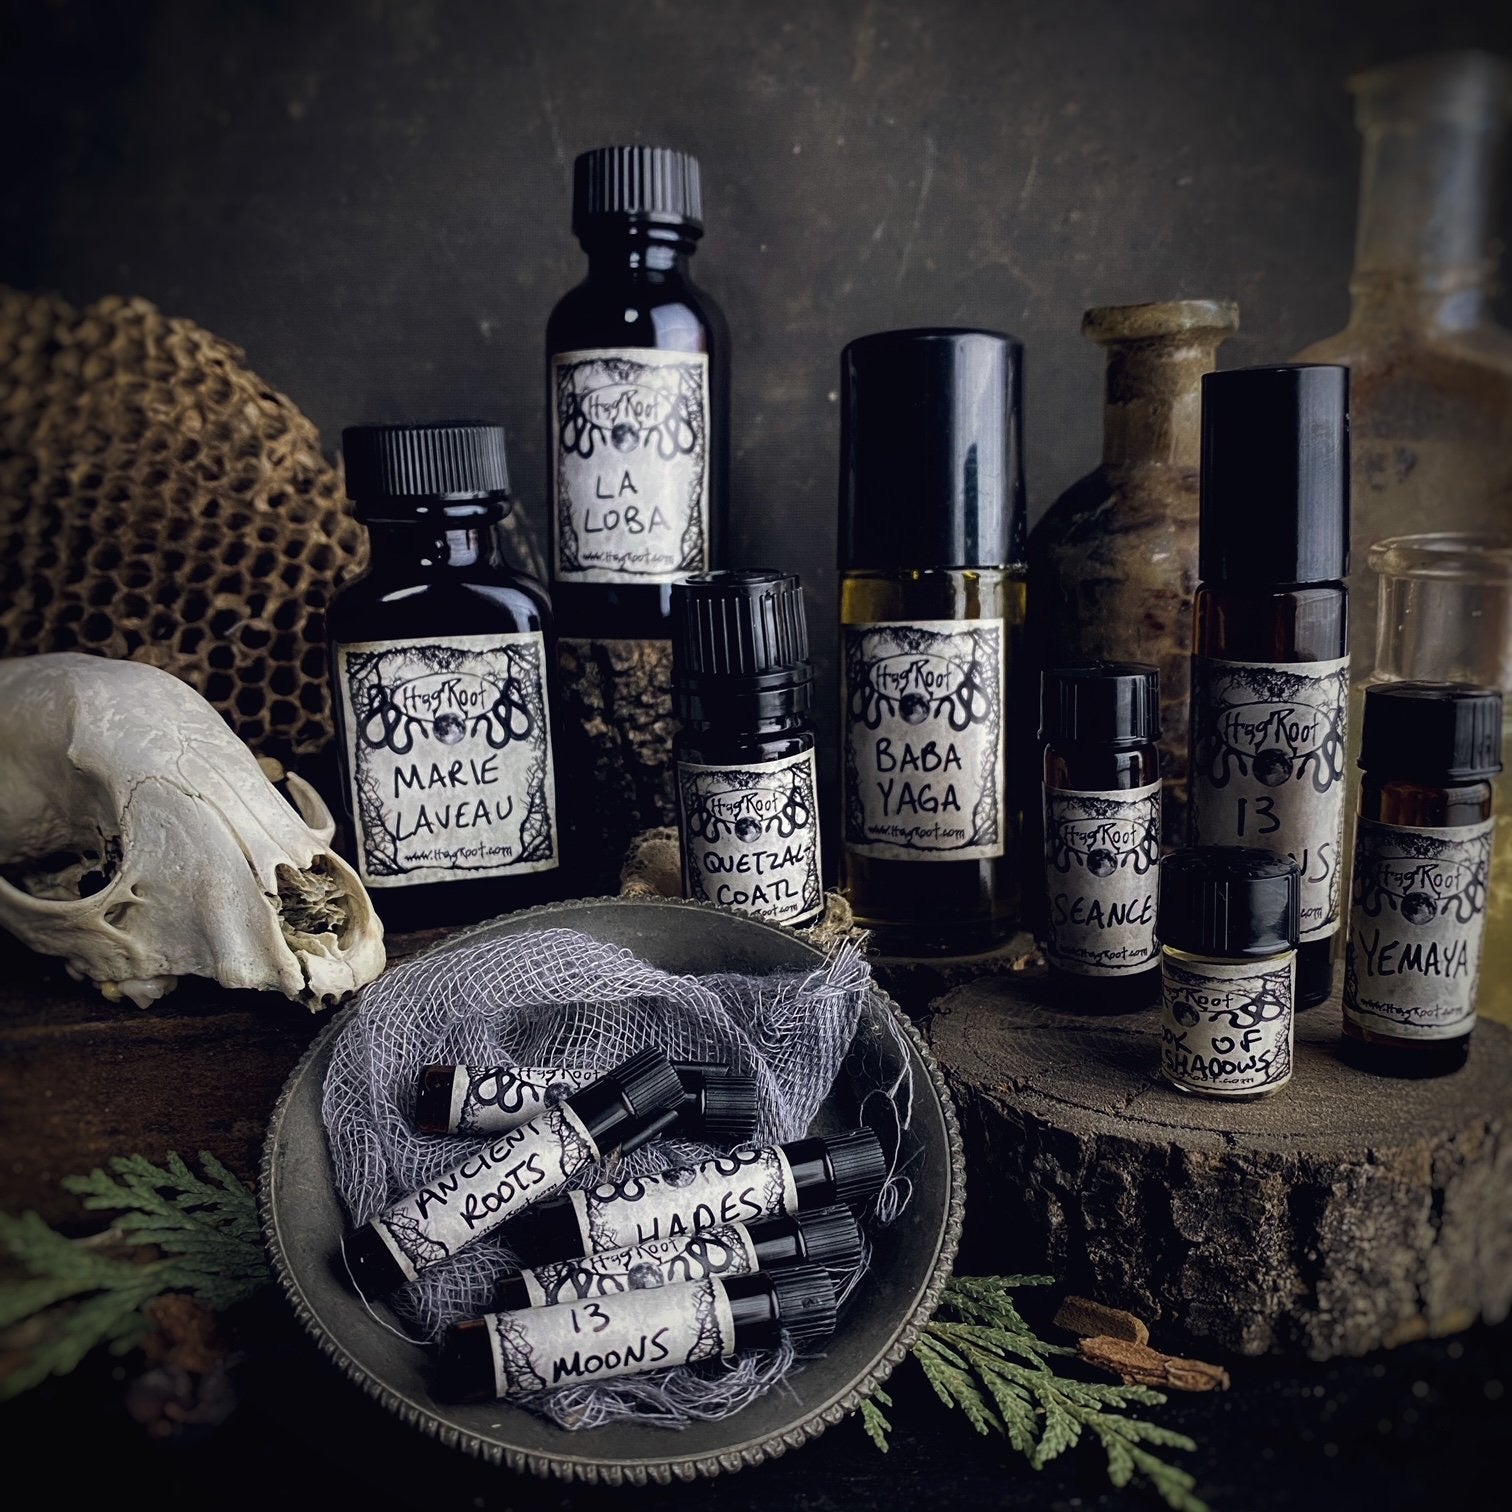 BOOK OF SHADOWS-(Aged Leather, Old Book Pages, Incense, Sweet Offerings)-2021 Edition-Perfume, Cologne, Anointing, Ritual Oil